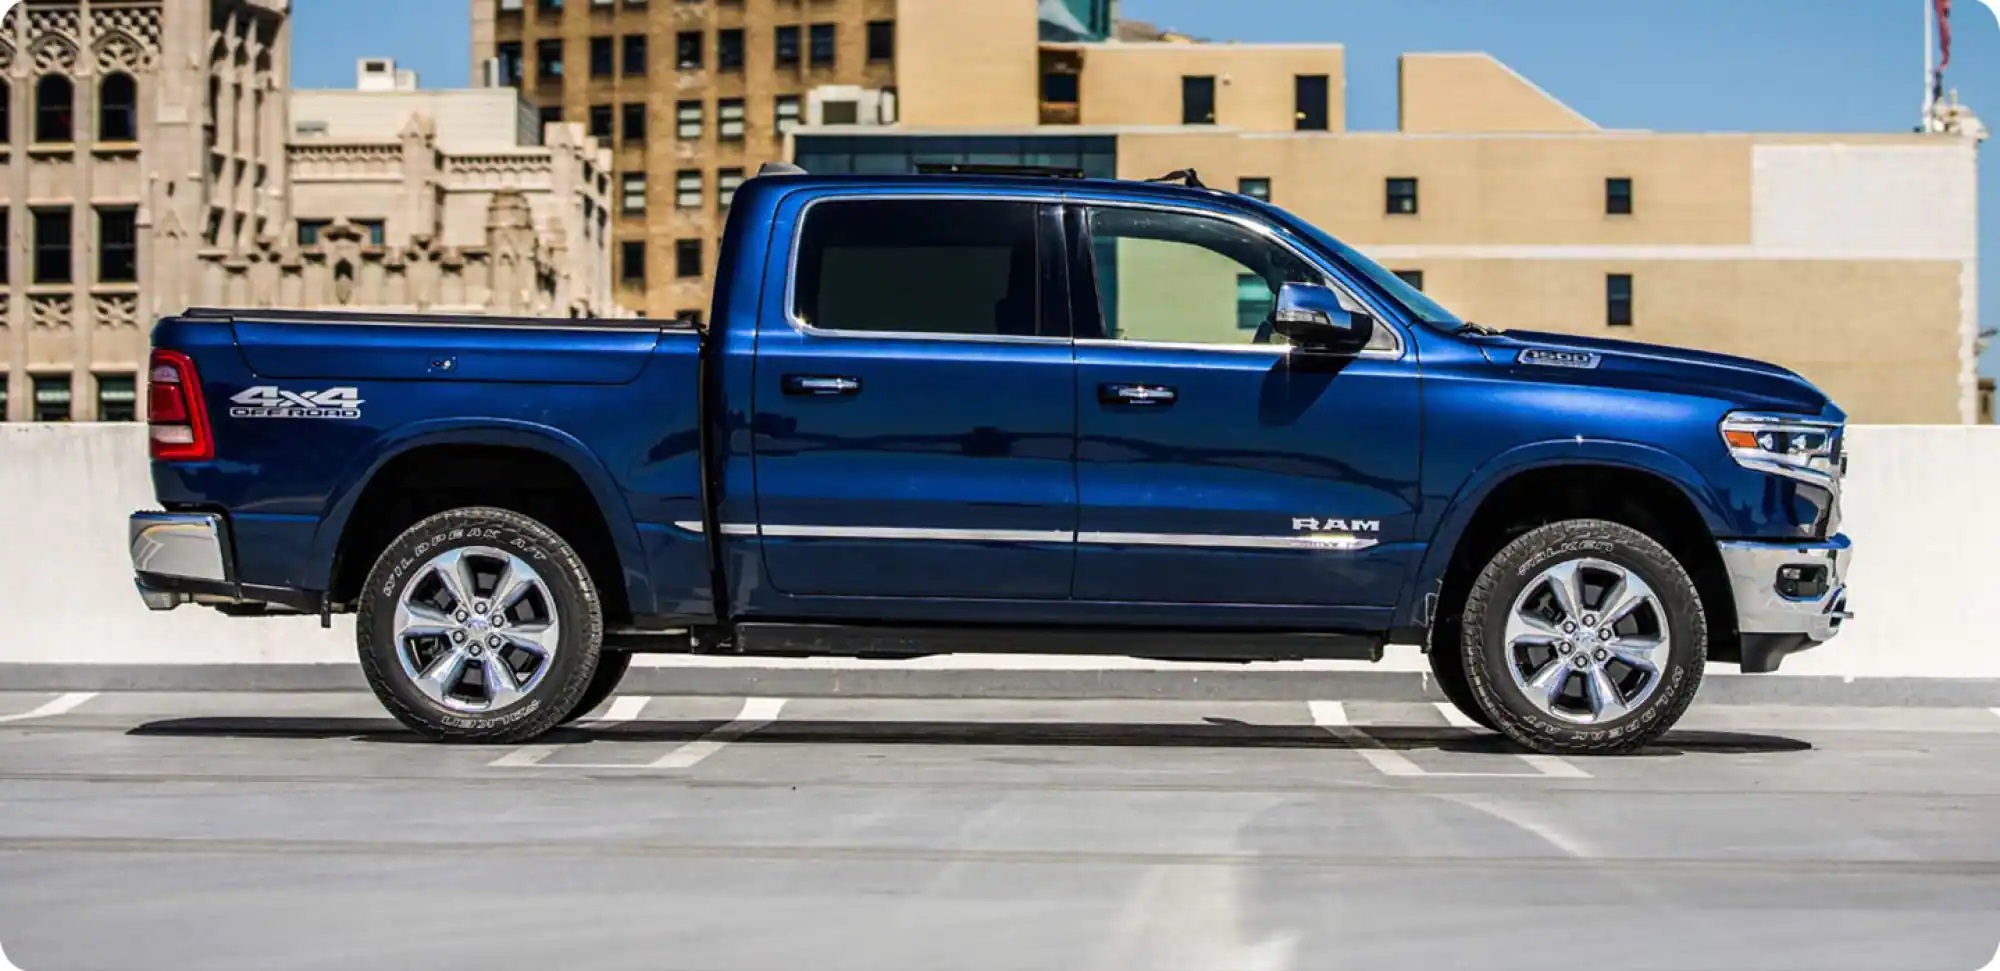 The Ram 1500 for sale at East Hills Chrysler Jeep Dodge Ram in Greenvale, NY